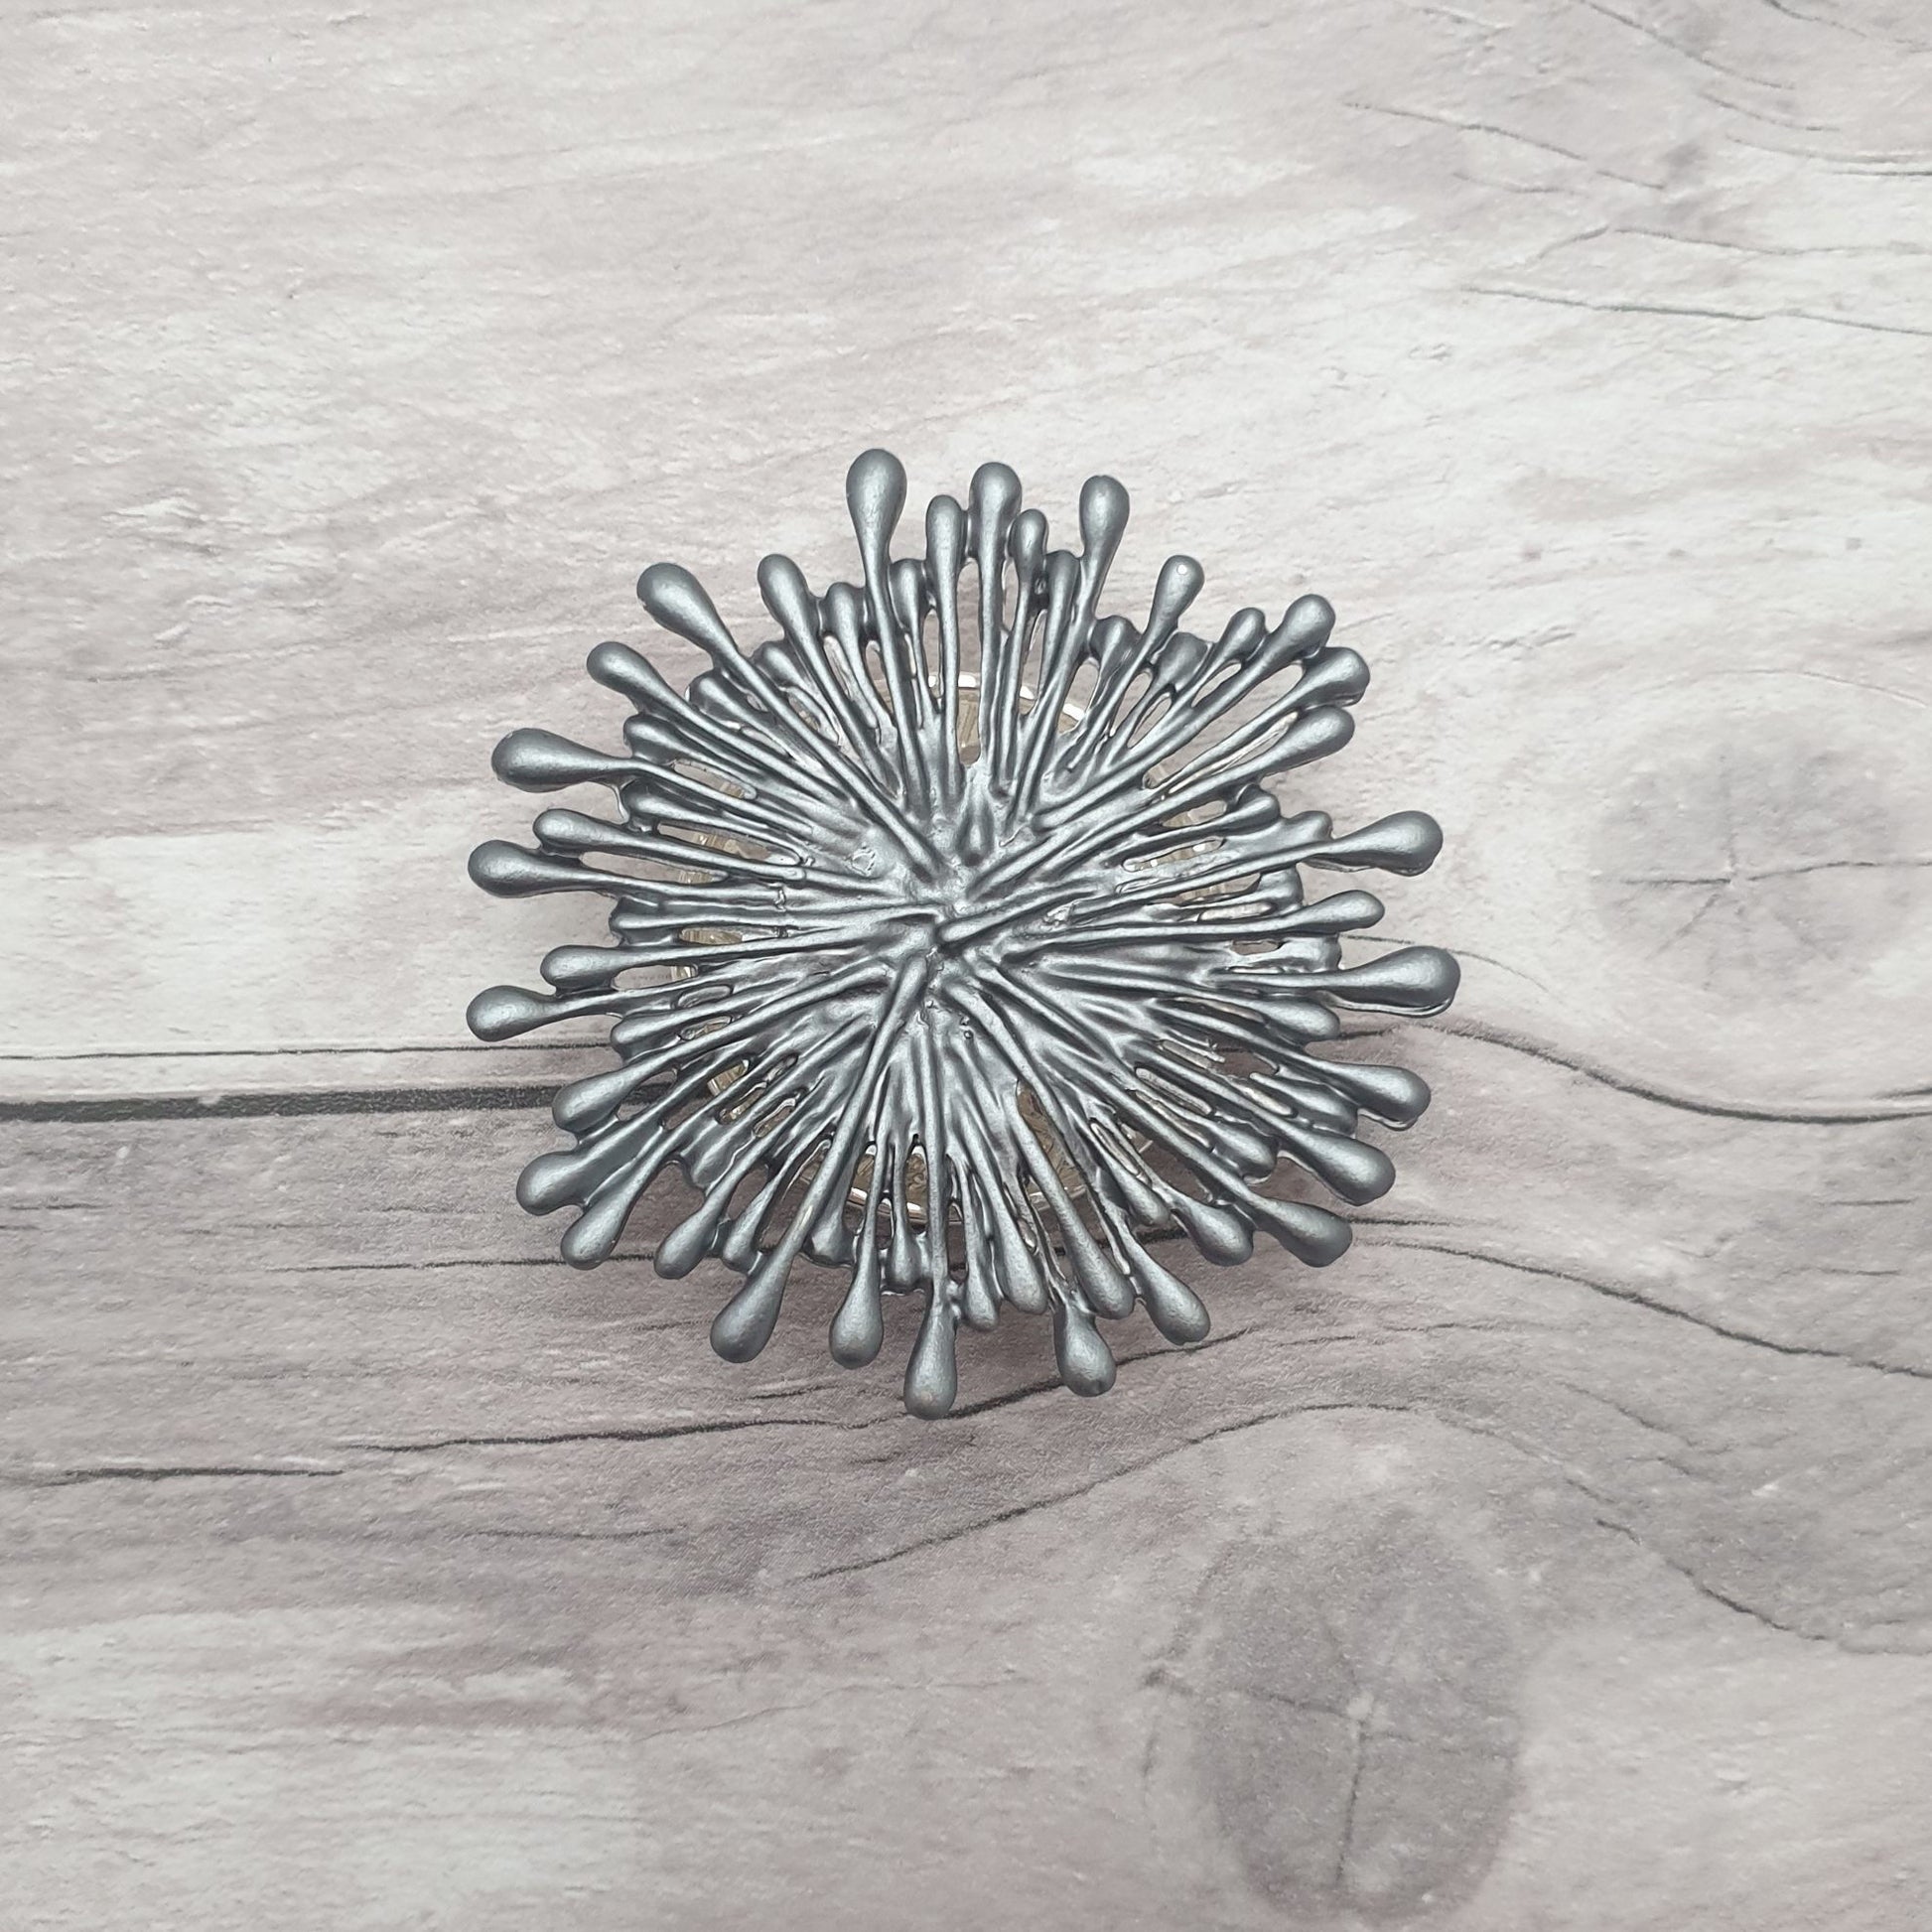 Photo a brooch that looks like an exploding grey firework